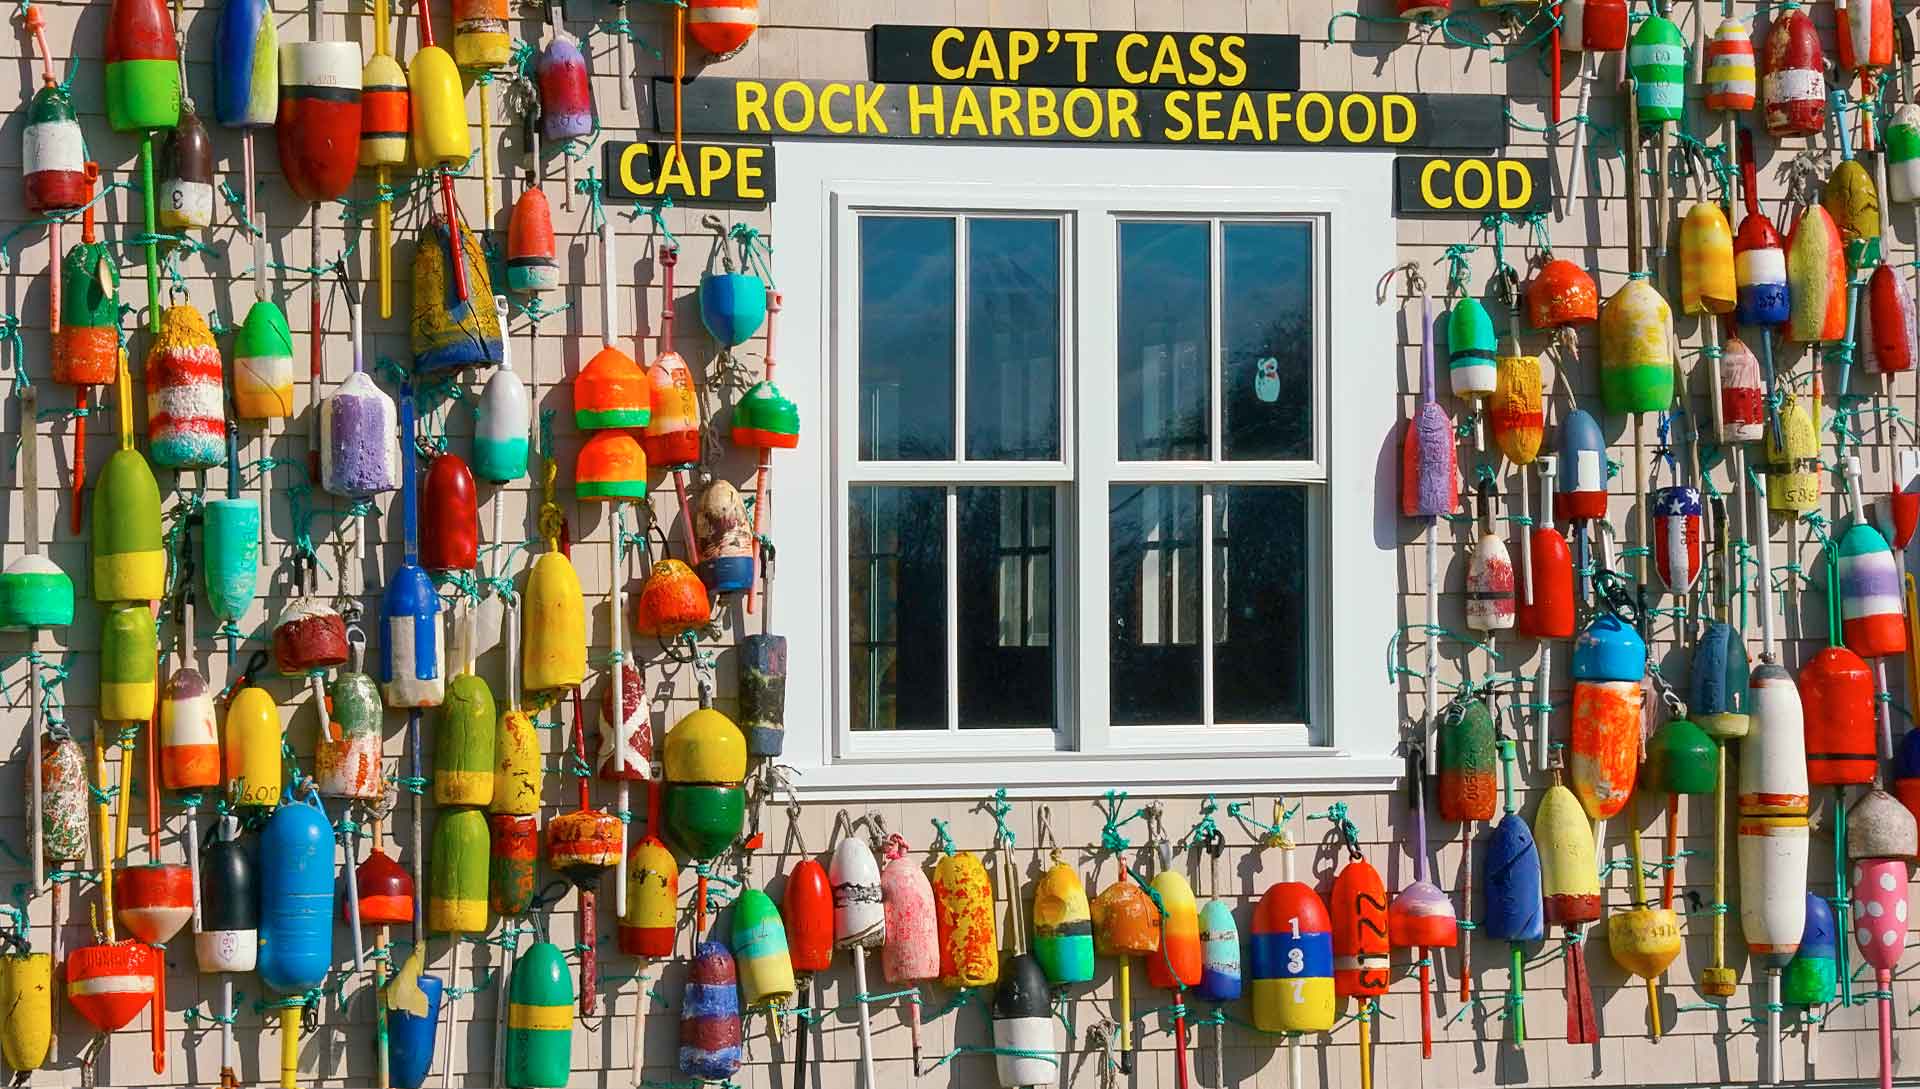 The west side of Cap't Cass Restaurant showing colorful lobster buoys hung in front of the shingles        